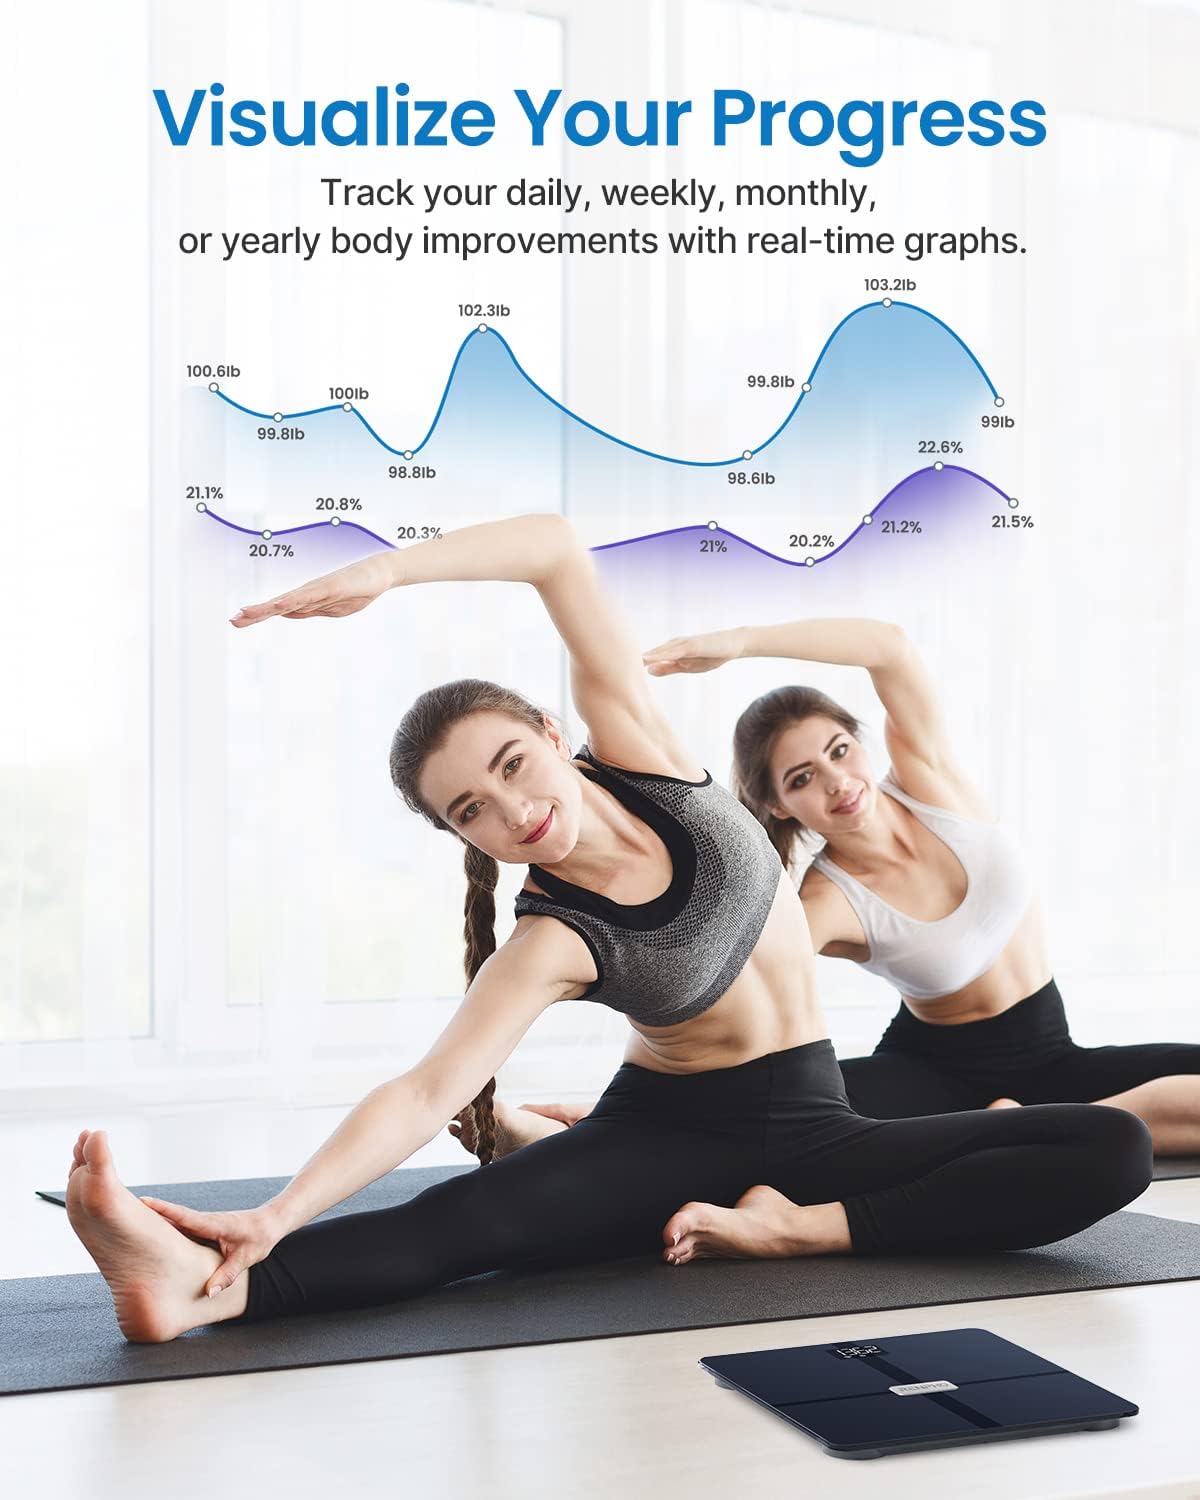 Two women in workout clothes stretch together on yoga mats in a bright, window-lit room, beside a graphic showing body improvement statistics displayed through the Renpho Health app. The text "Visualize your progress" is written above the Elis Aspire Smart Body Scale.